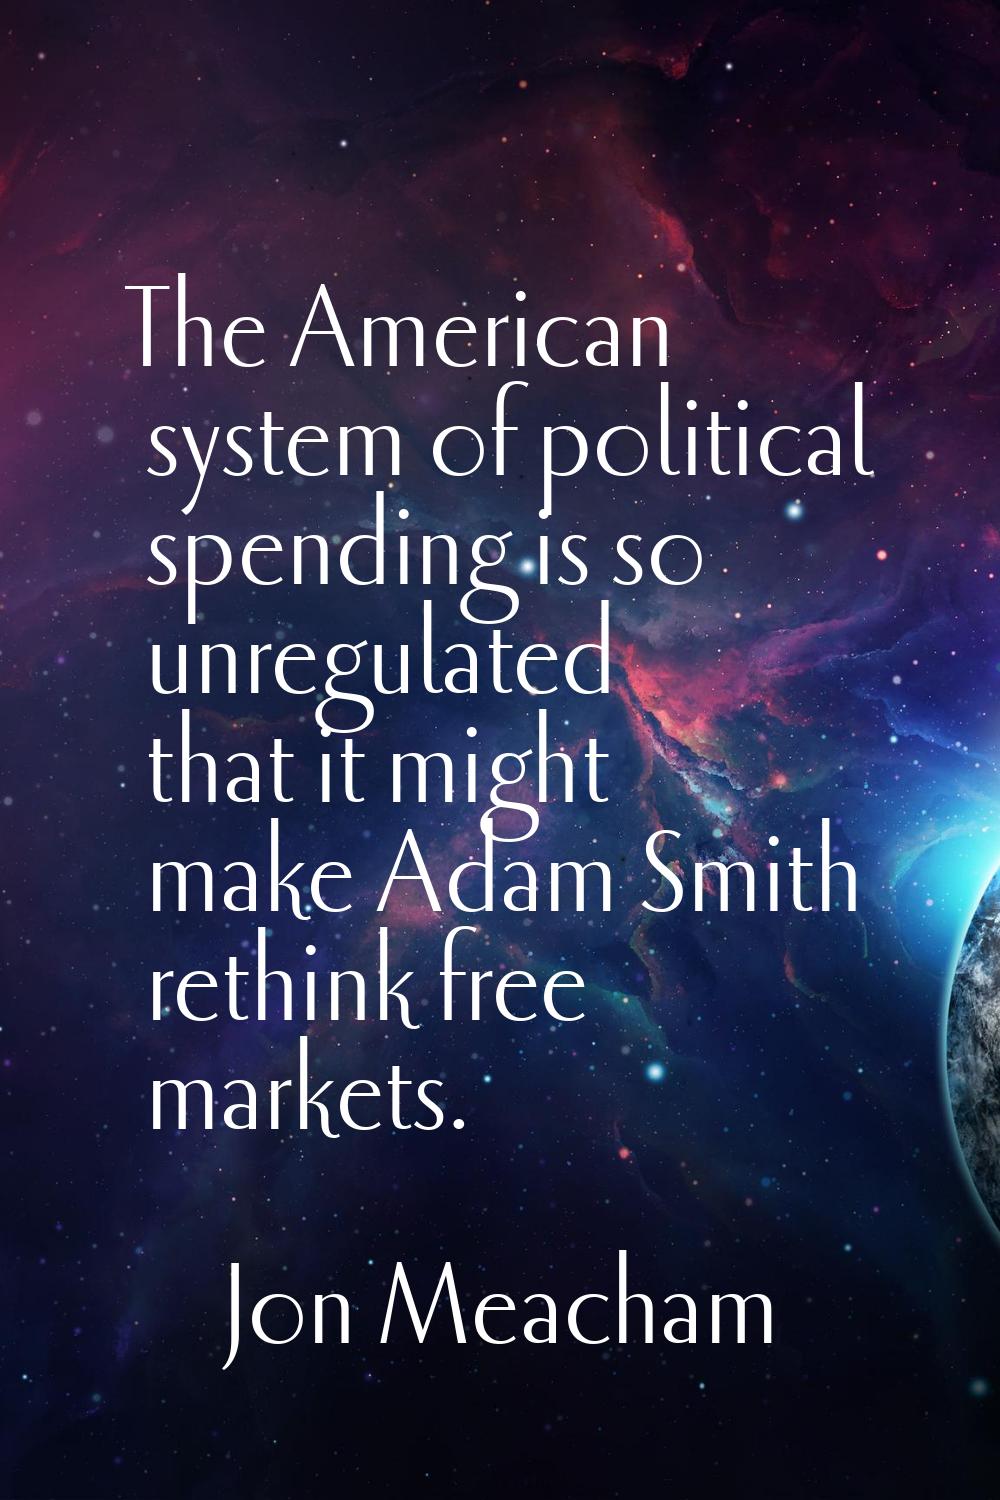 The American system of political spending is so unregulated that it might make Adam Smith rethink f